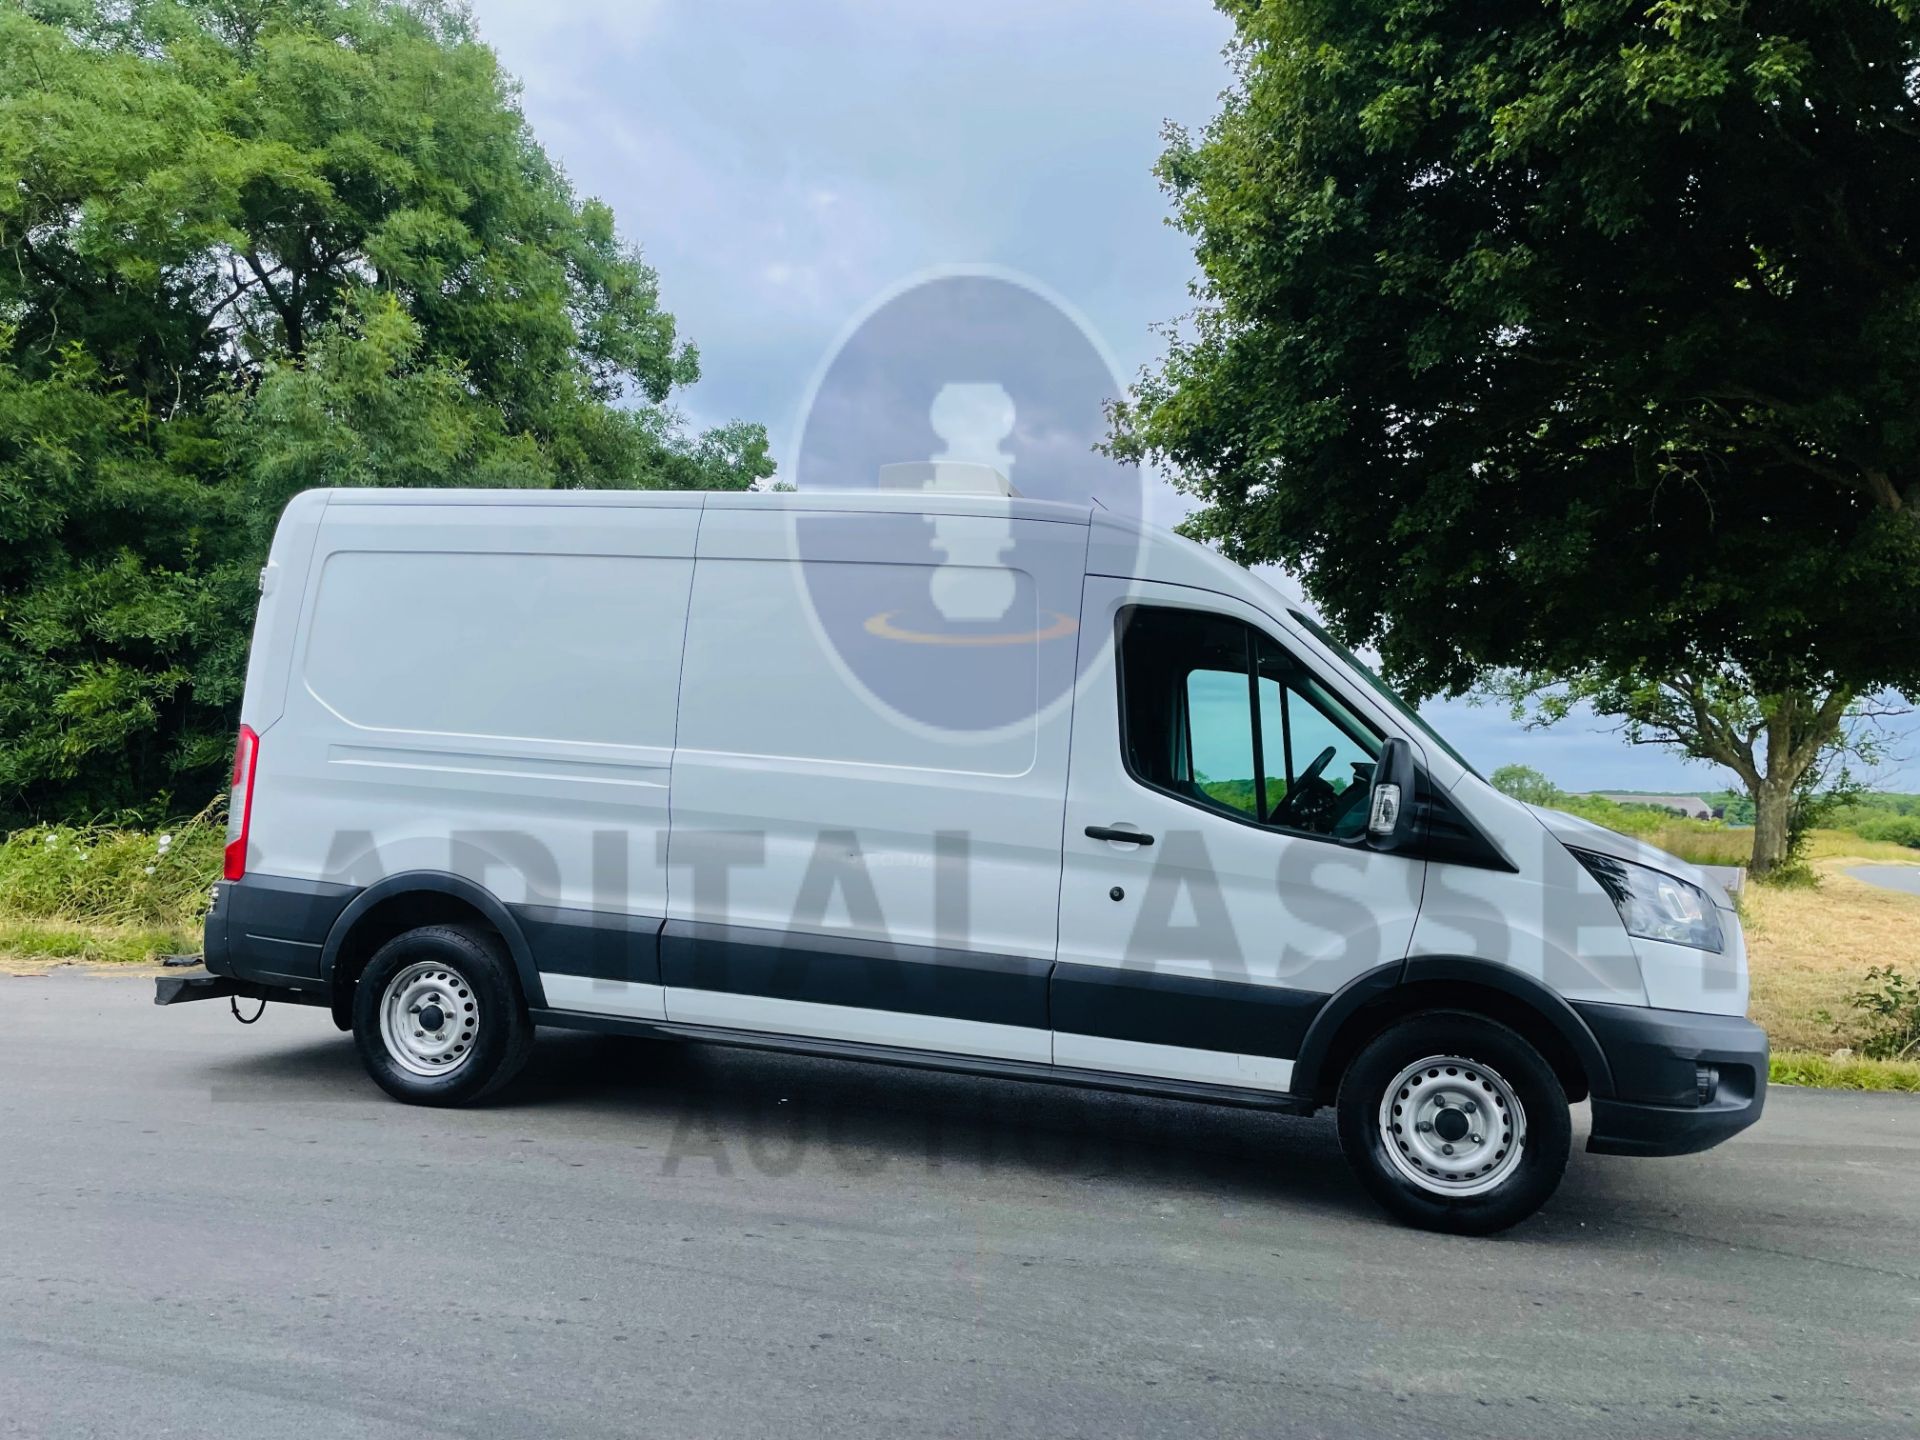 (On Sale) FORD TRANSIT 130 T350 *LWB -REFRIGERATED VAN* (2017 - EURO 6) 2.0 TDCI 'ECOBLUE' - 6 SPEED - Image 14 of 42